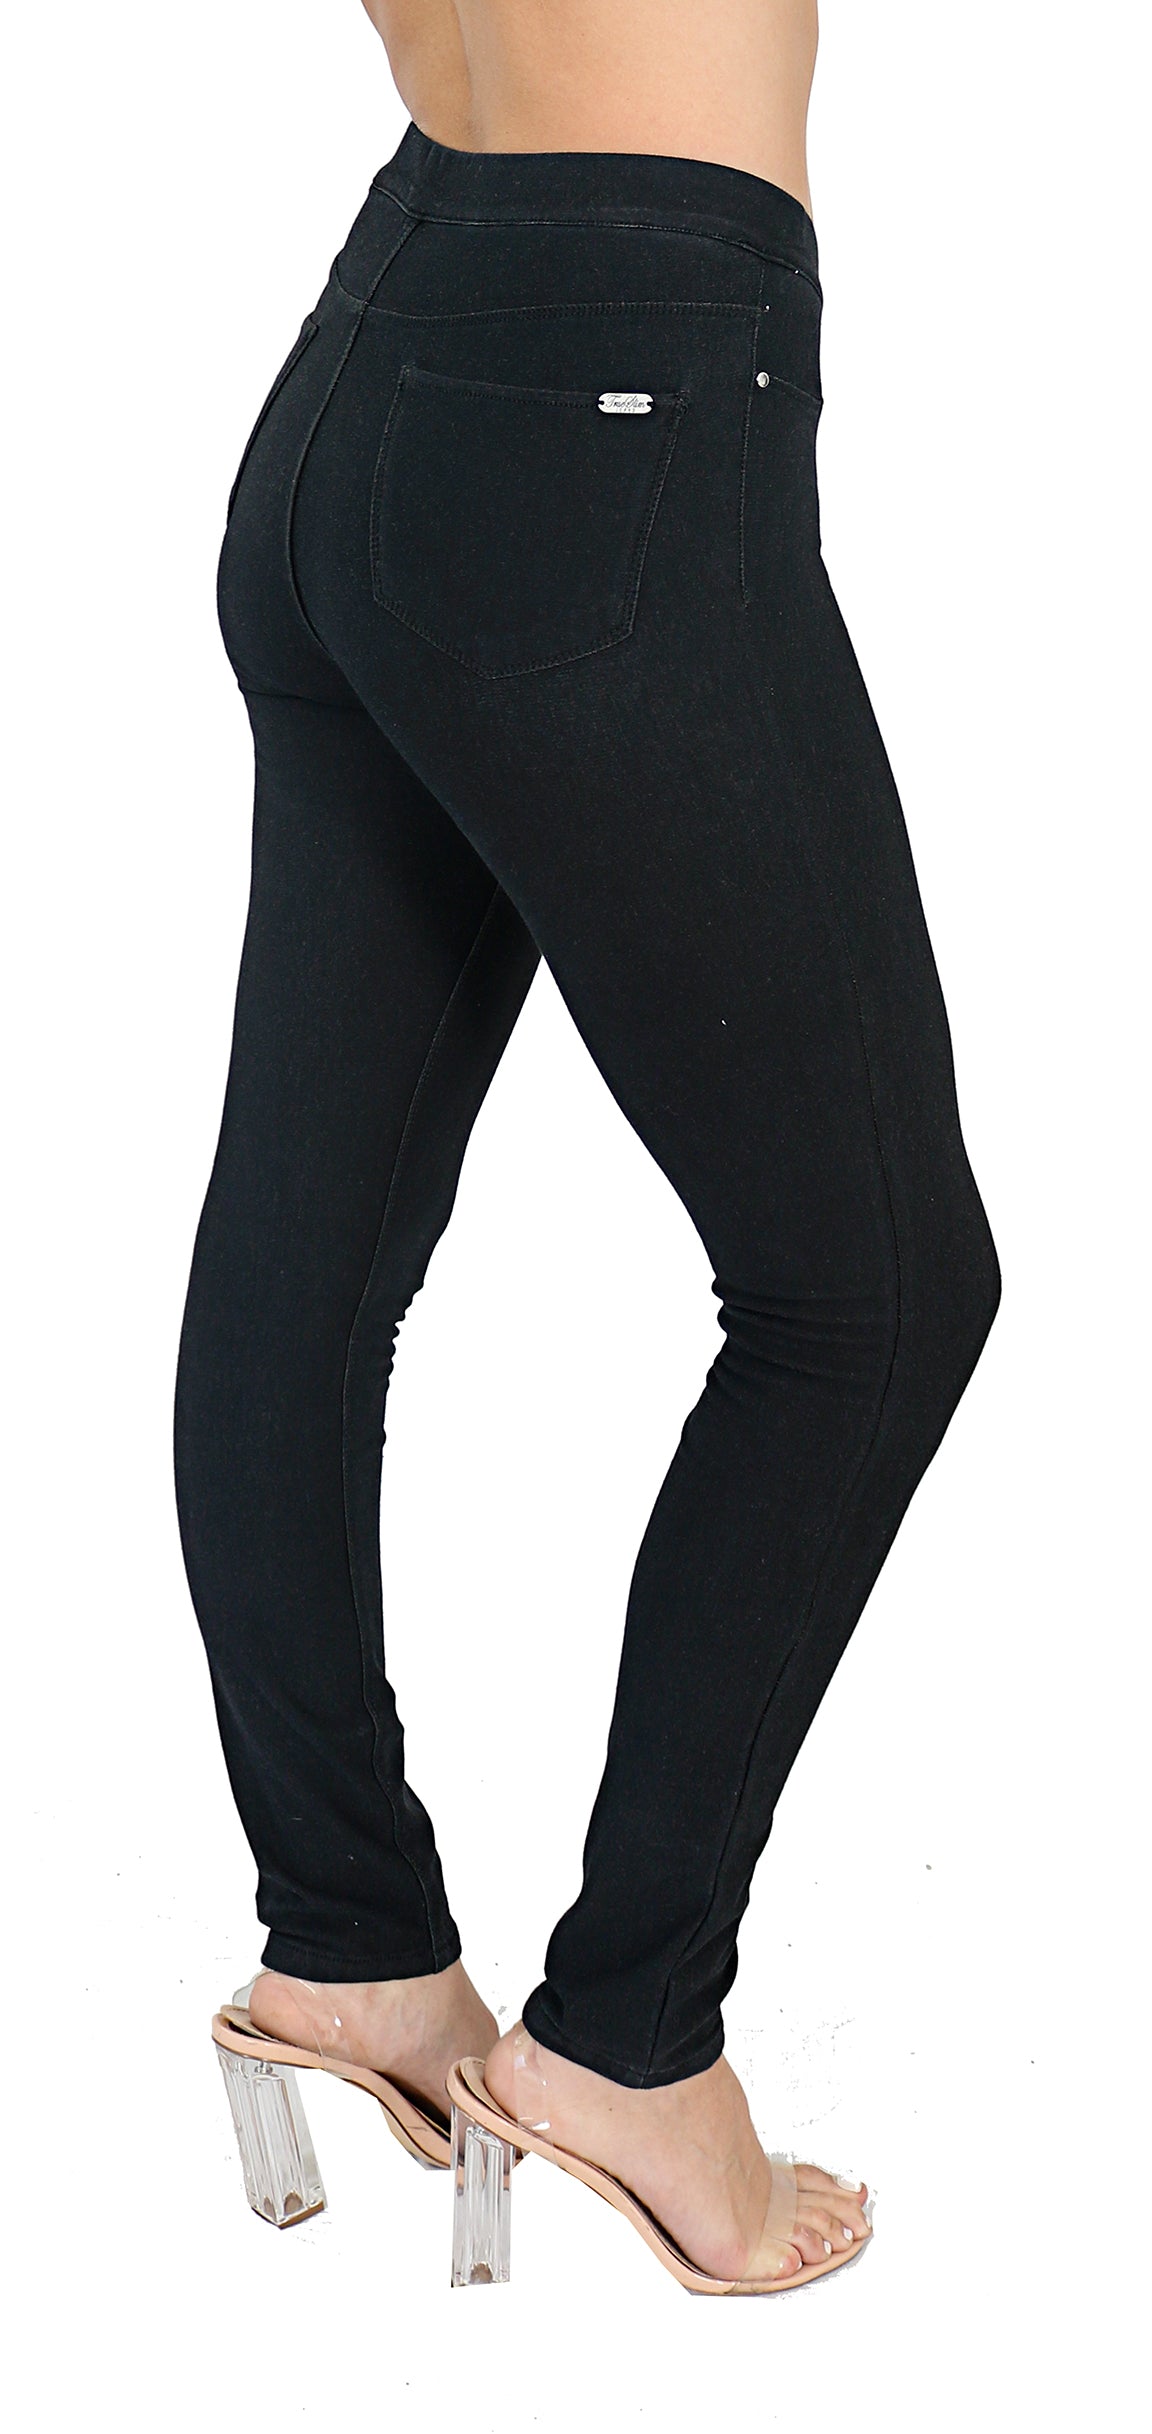 Ankle Bands Jeans Leggings - Buy Ankle Bands Jeans Leggings online in India